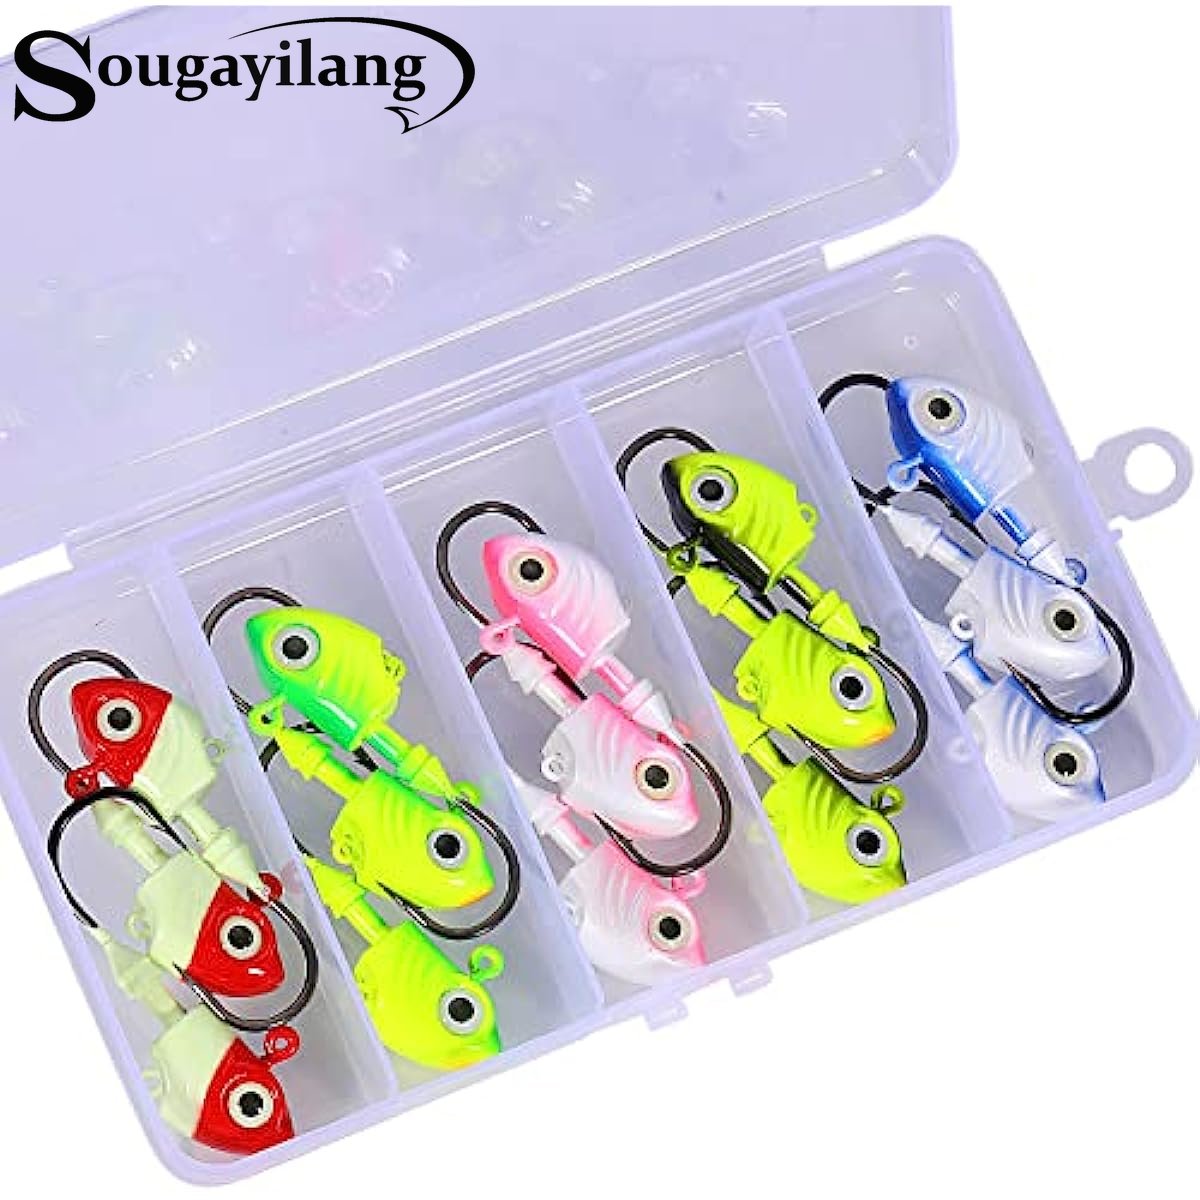 Jig bait with hooks Stock Photo by ©mikhafff1984 95942564